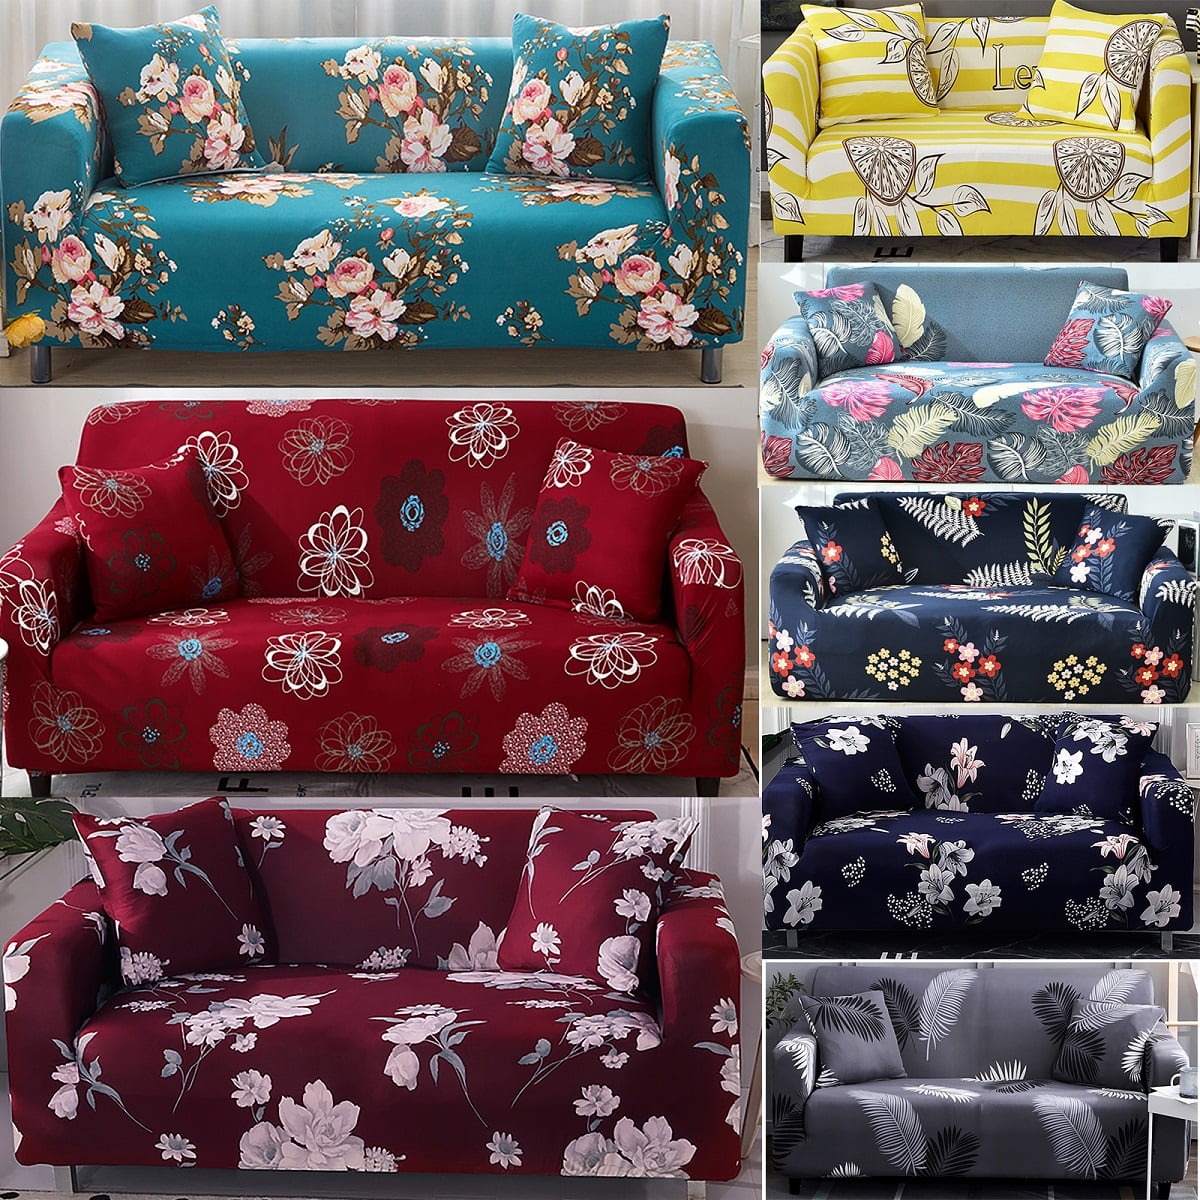 Luxury Sofa Slipcovers Seater Towel Skirt Sectional Couch Floral Cover Protector 